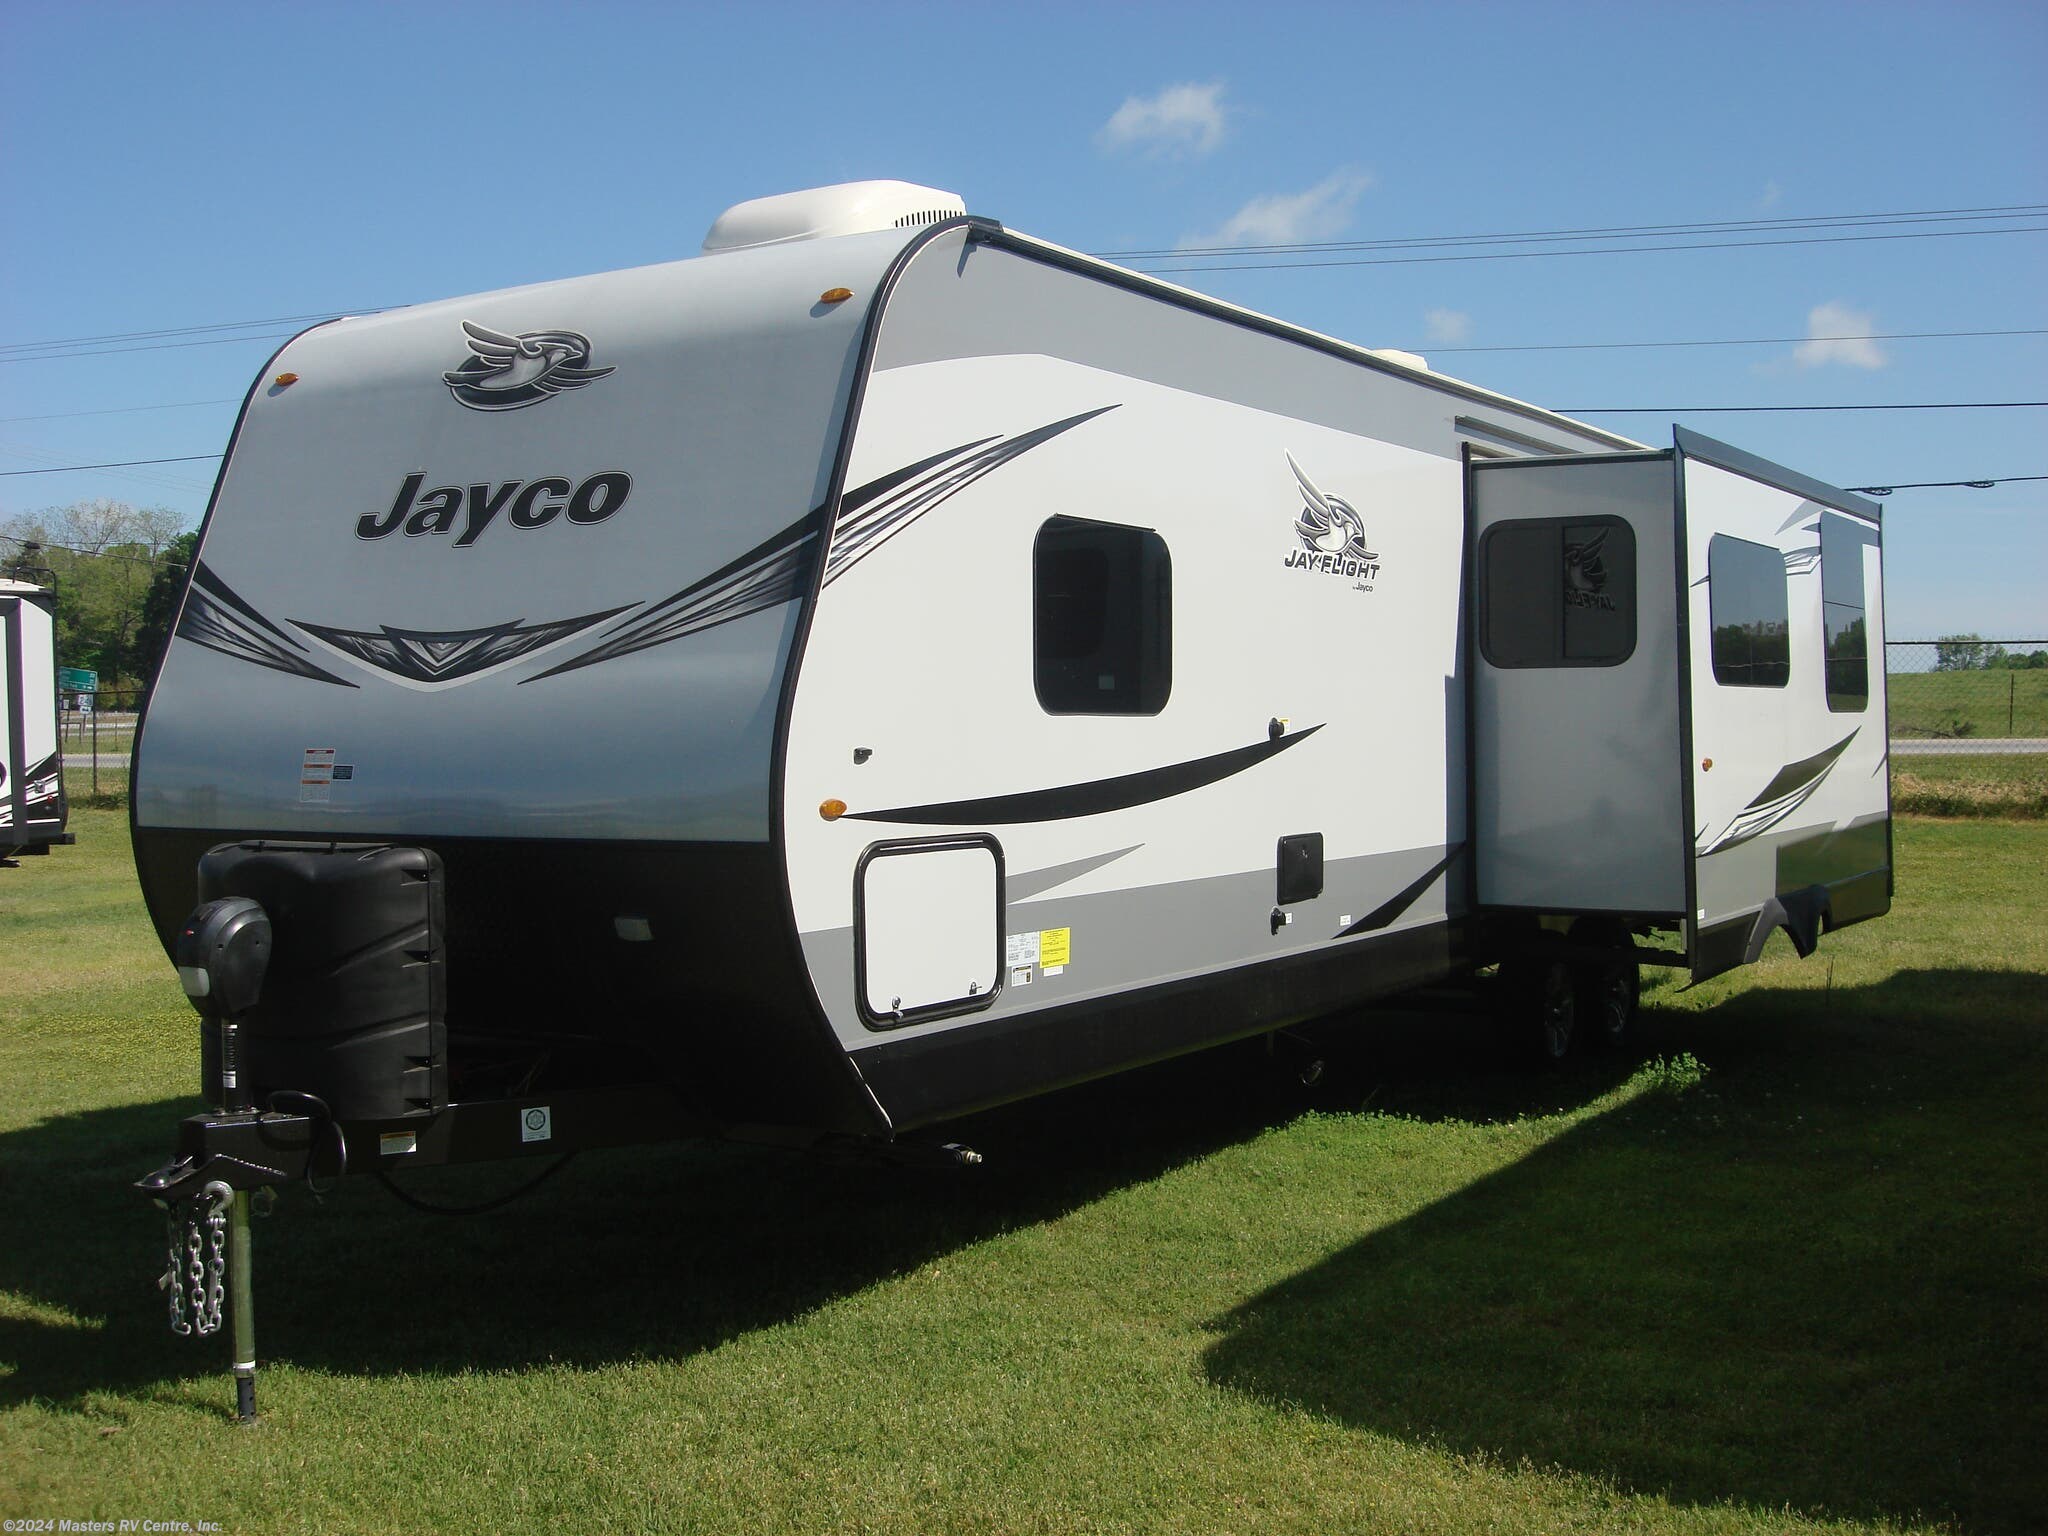 tv for jayco travel trailer